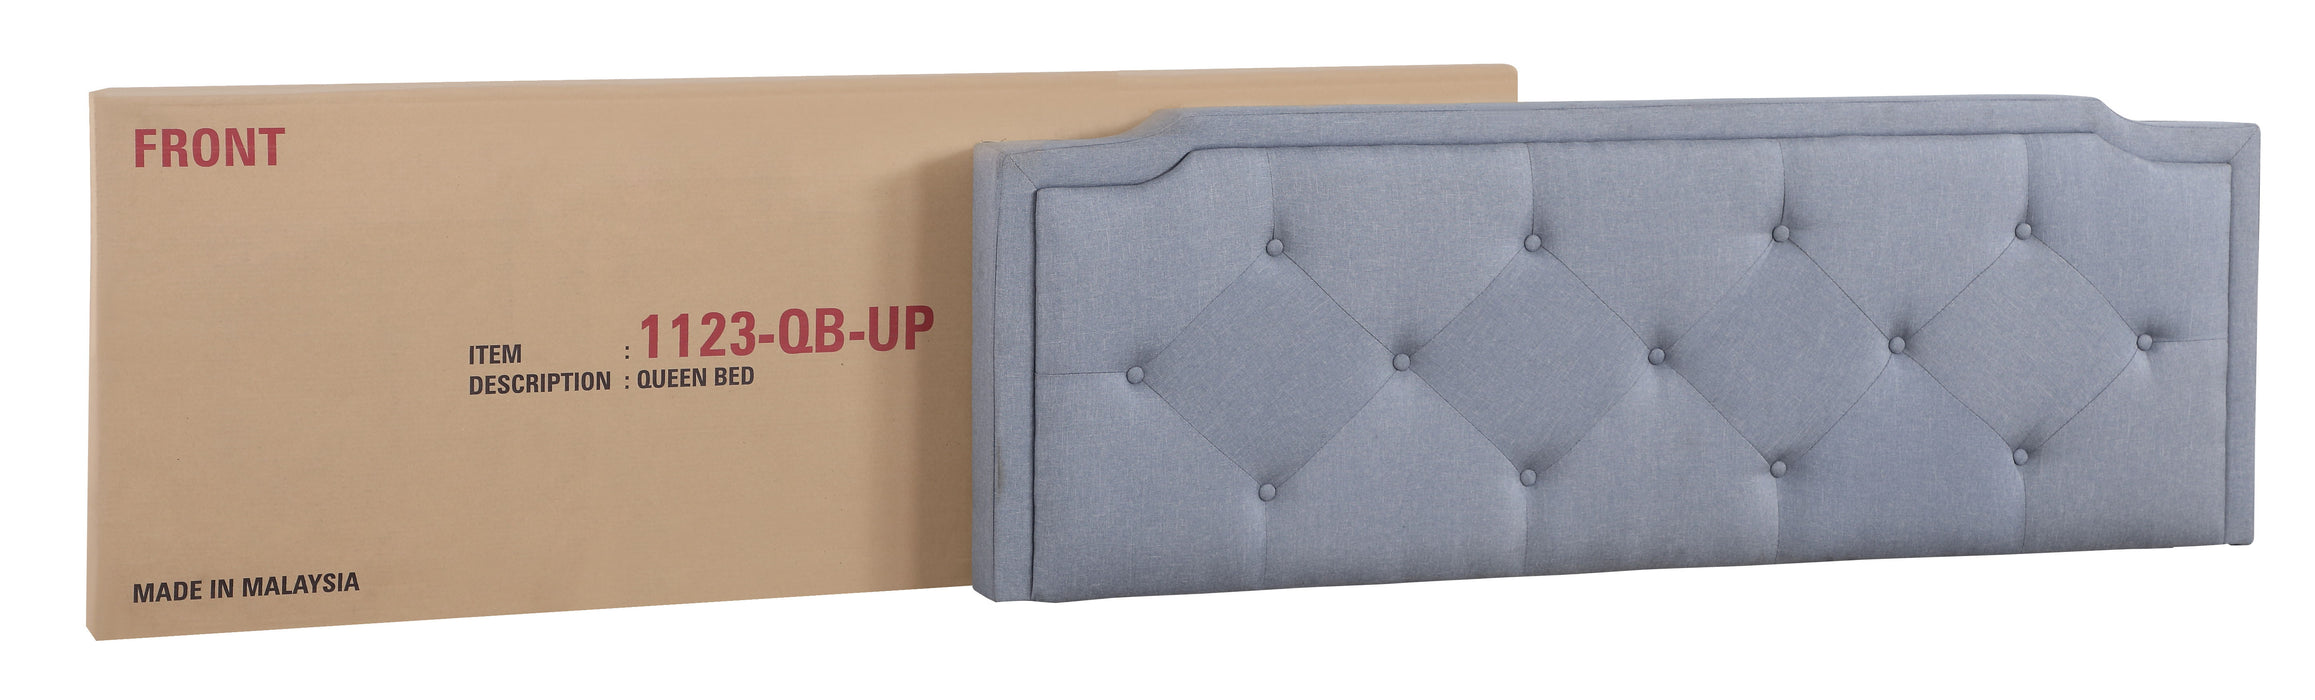 Deb - G1123-FB-UP Full Bed (All in One Box) - Blue